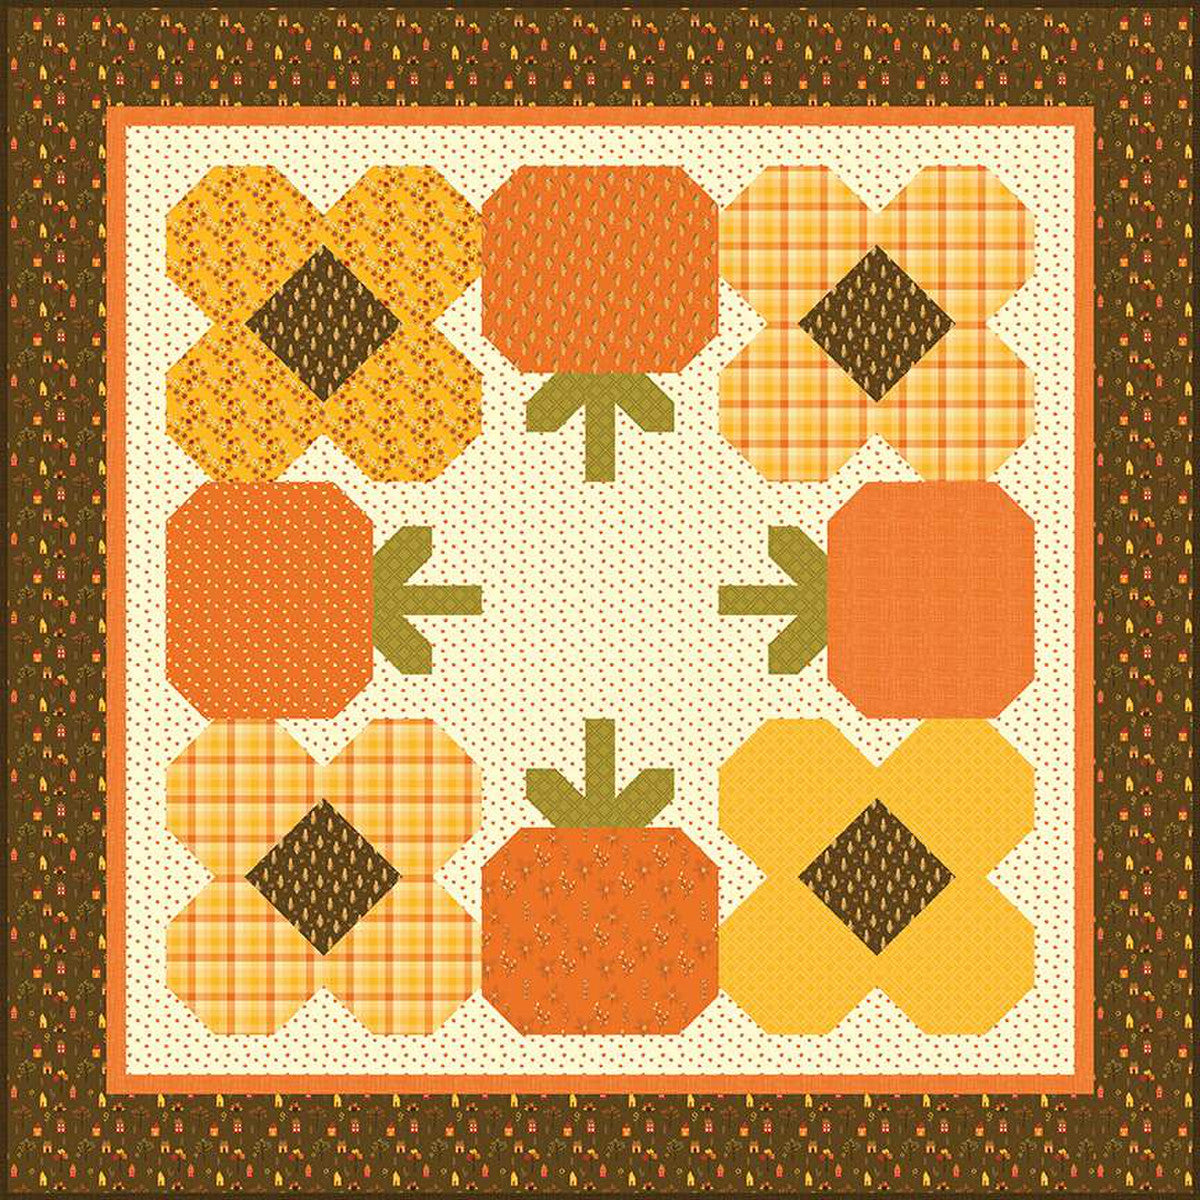 The Pumpkin Parade Runner and Quilt by Sandy Gervais of Pieces from My Heart are quick and easy piecing. You can choose to put faces on the pumpkins or not. This pattern includes instructions for both a quilt and a runner. Finished quilt size is 60" x 60". Finished runner size is 20" x 80".